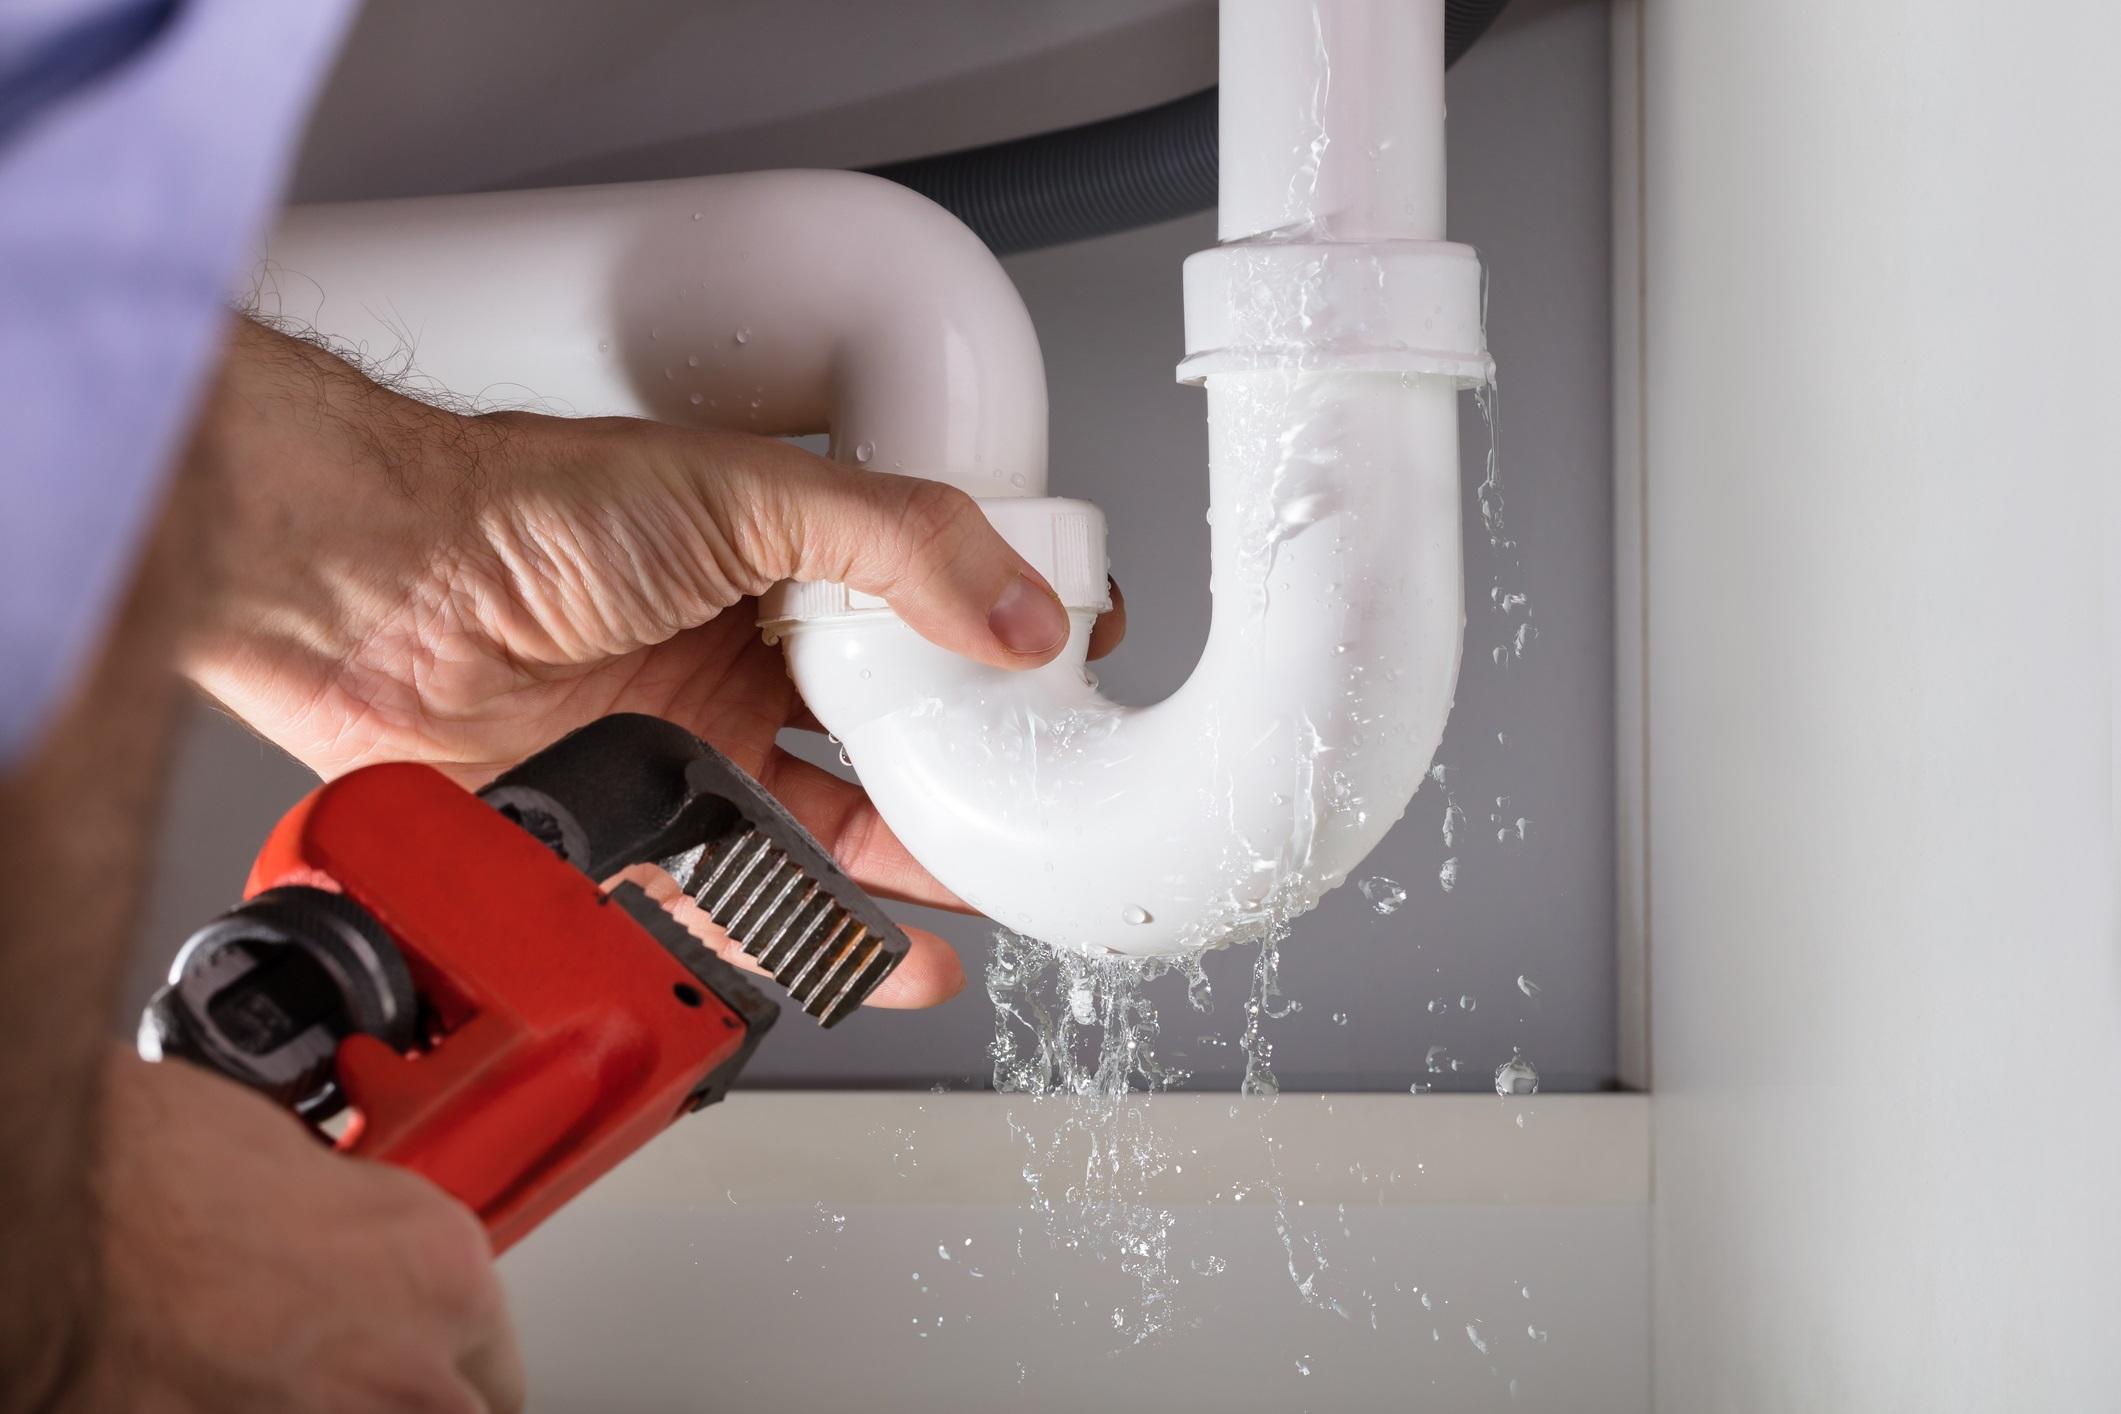 At Advanced Plumbing & Drain Cleaning, we can handle any plumbing project no matter the difficulty. From unclogging a drain to installing a new water heater system, we have the skill and expertise to have your plumbing issue fixed up and ready to go.